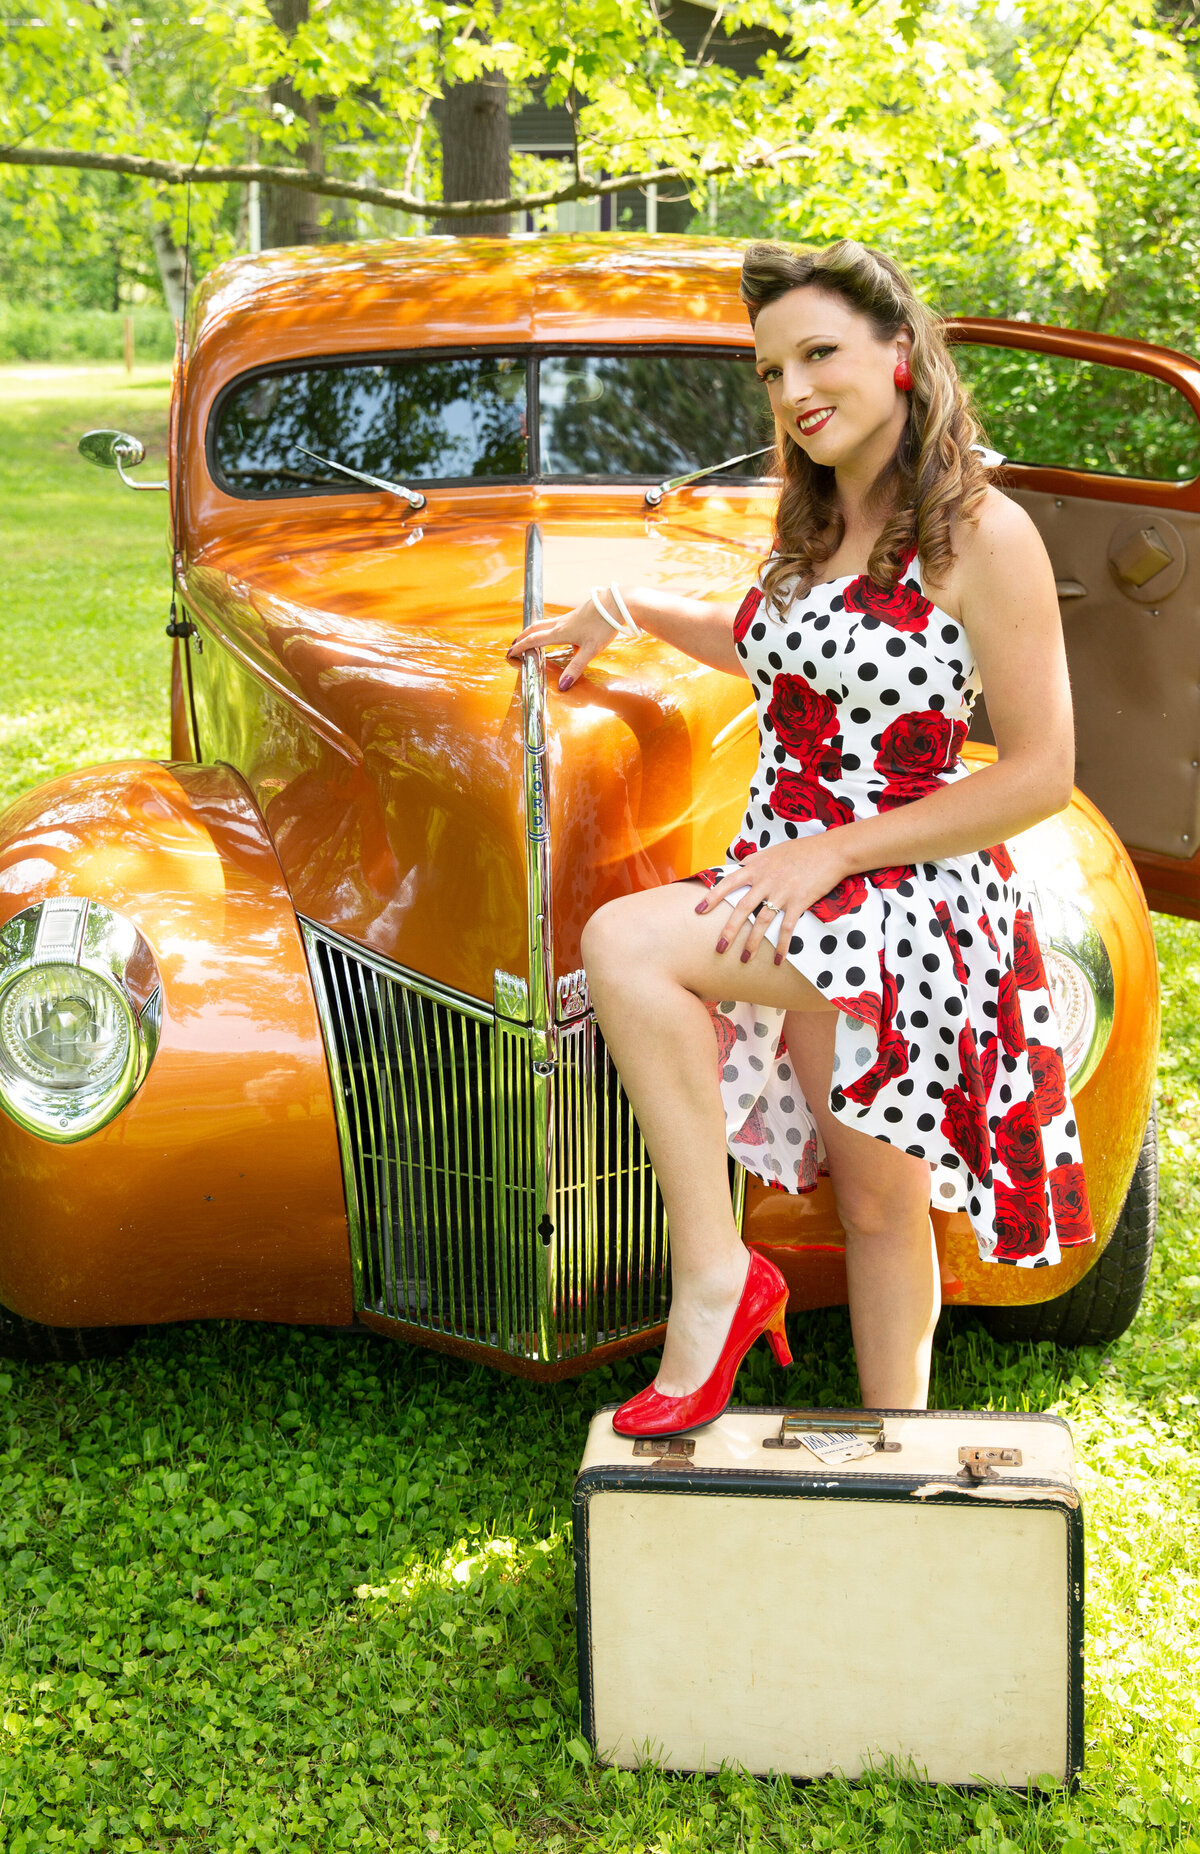 goddess studio boudoir woman pinup special pinup style old suitcase red heels red roses dress old ford pickup